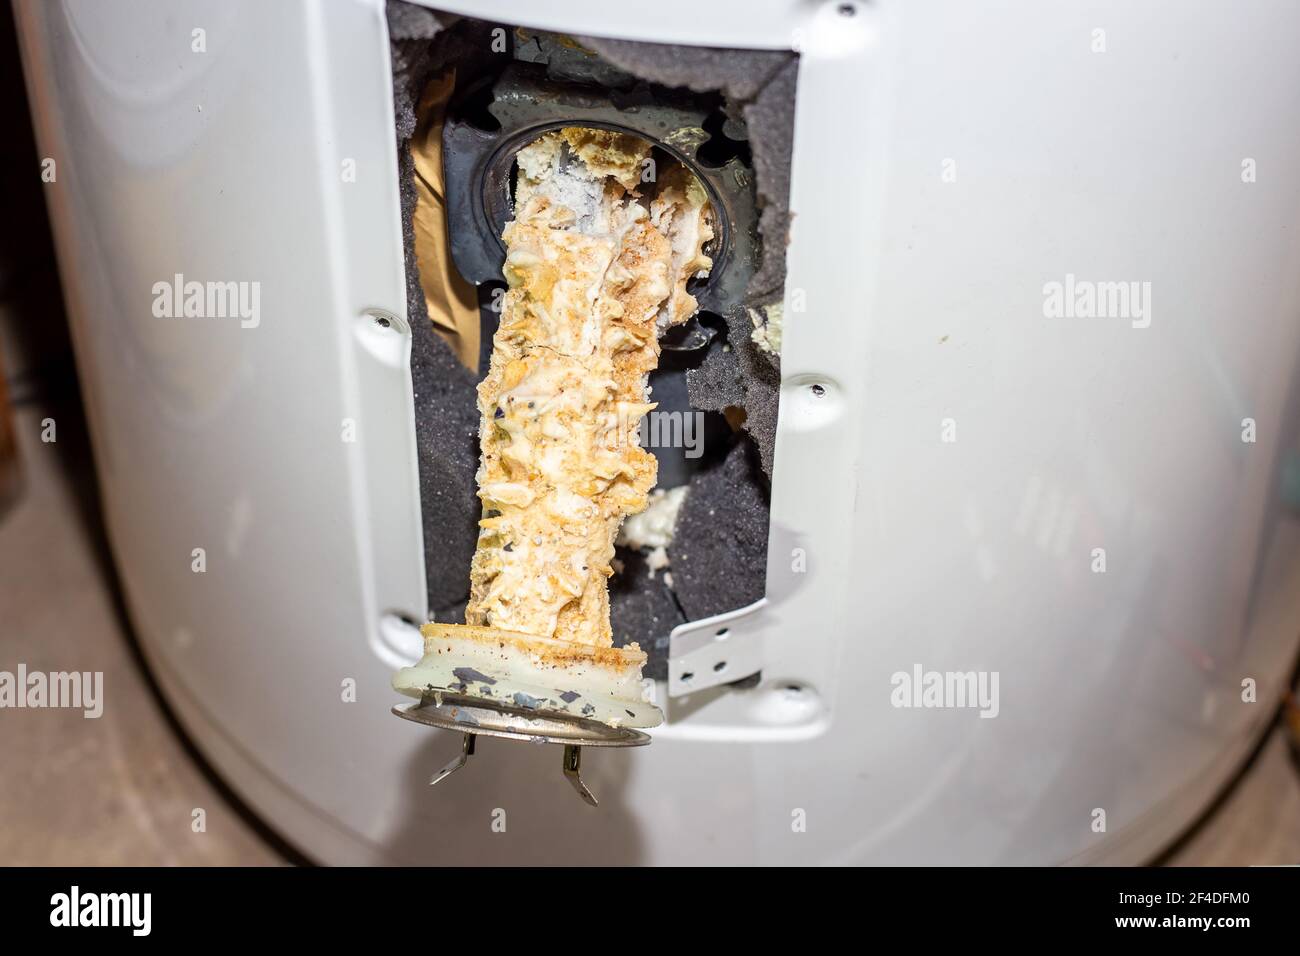 Repair and maintenance of boilers. A tubular electric heater covered with lime scale sticks out of the hole in the boiler. Stock Photo